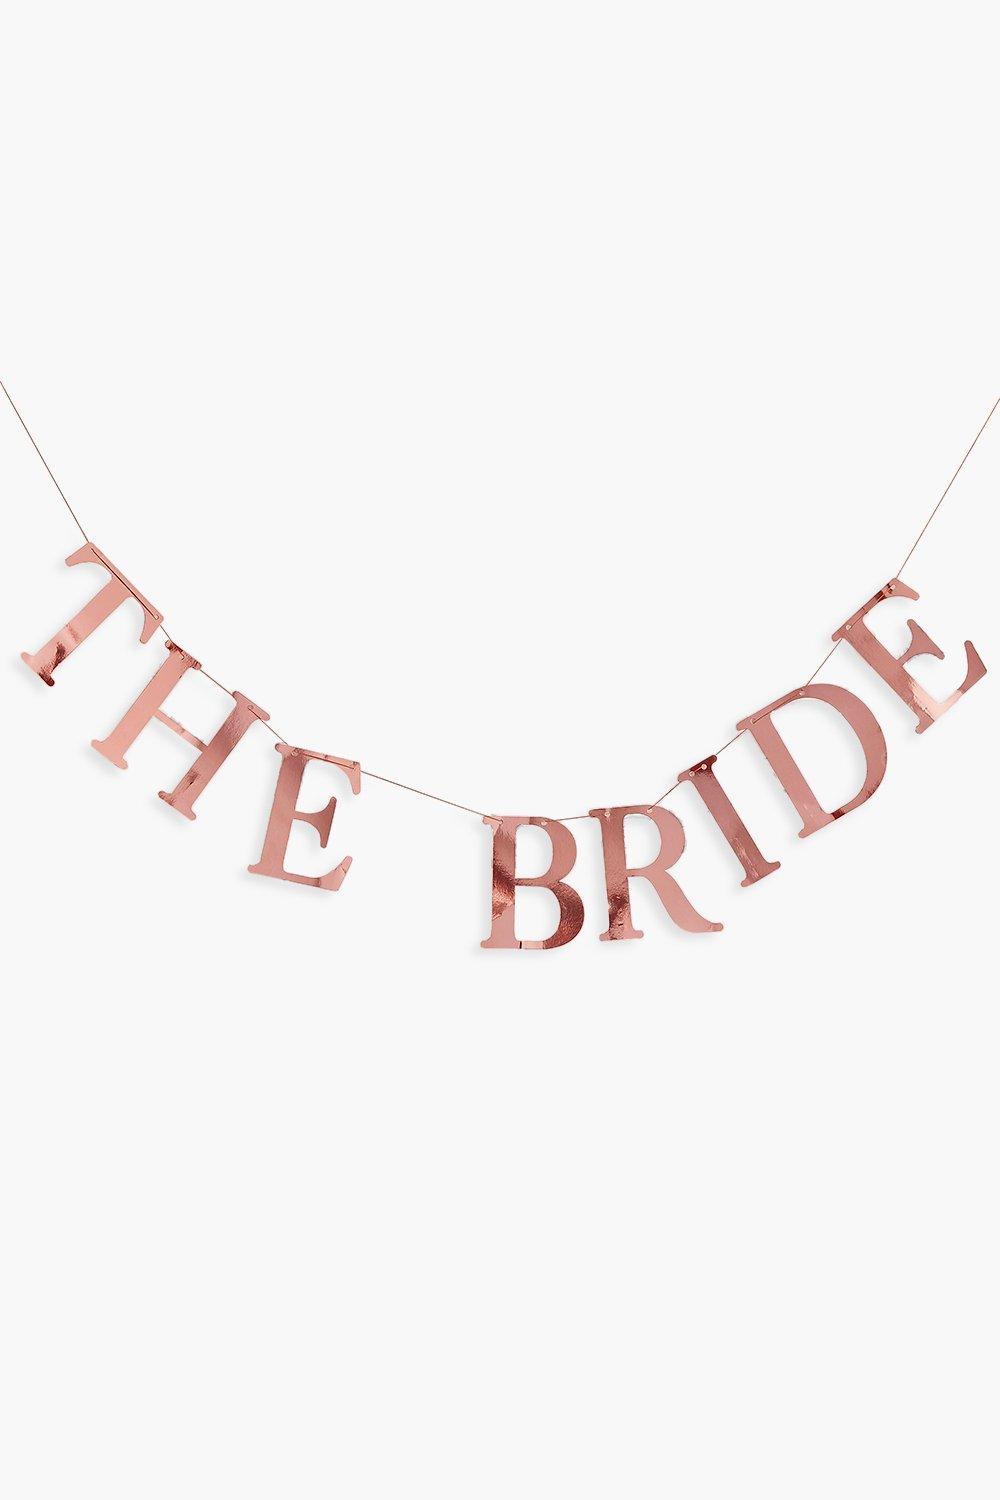 Ginger Ray The Bride Peg Bunting, Rose Gold